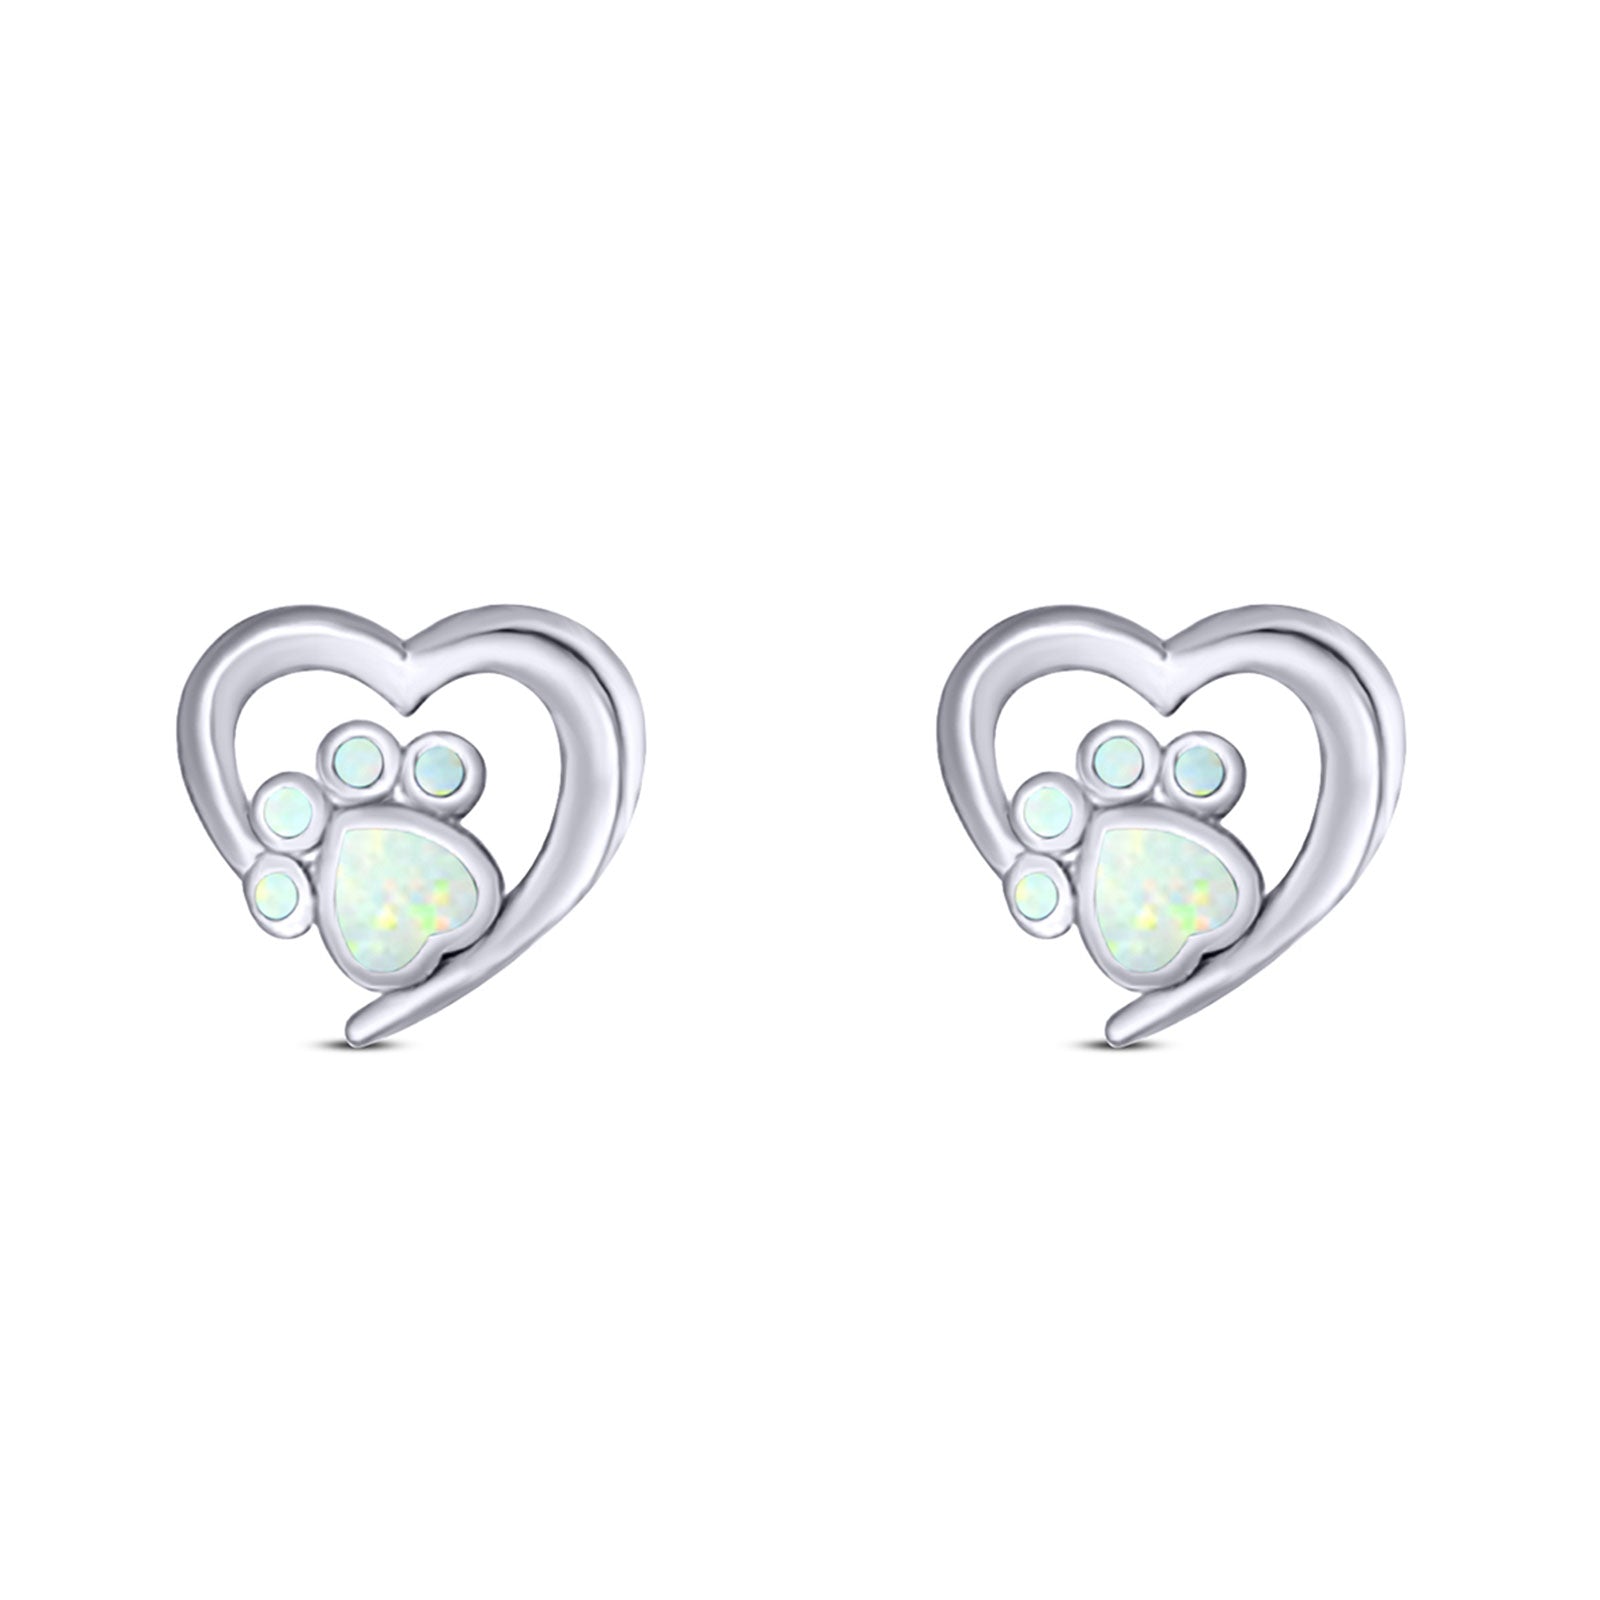 Heart & Paw Print Stud Earring Created Opal White Solid 925 Sterling Silver (9.1mm)